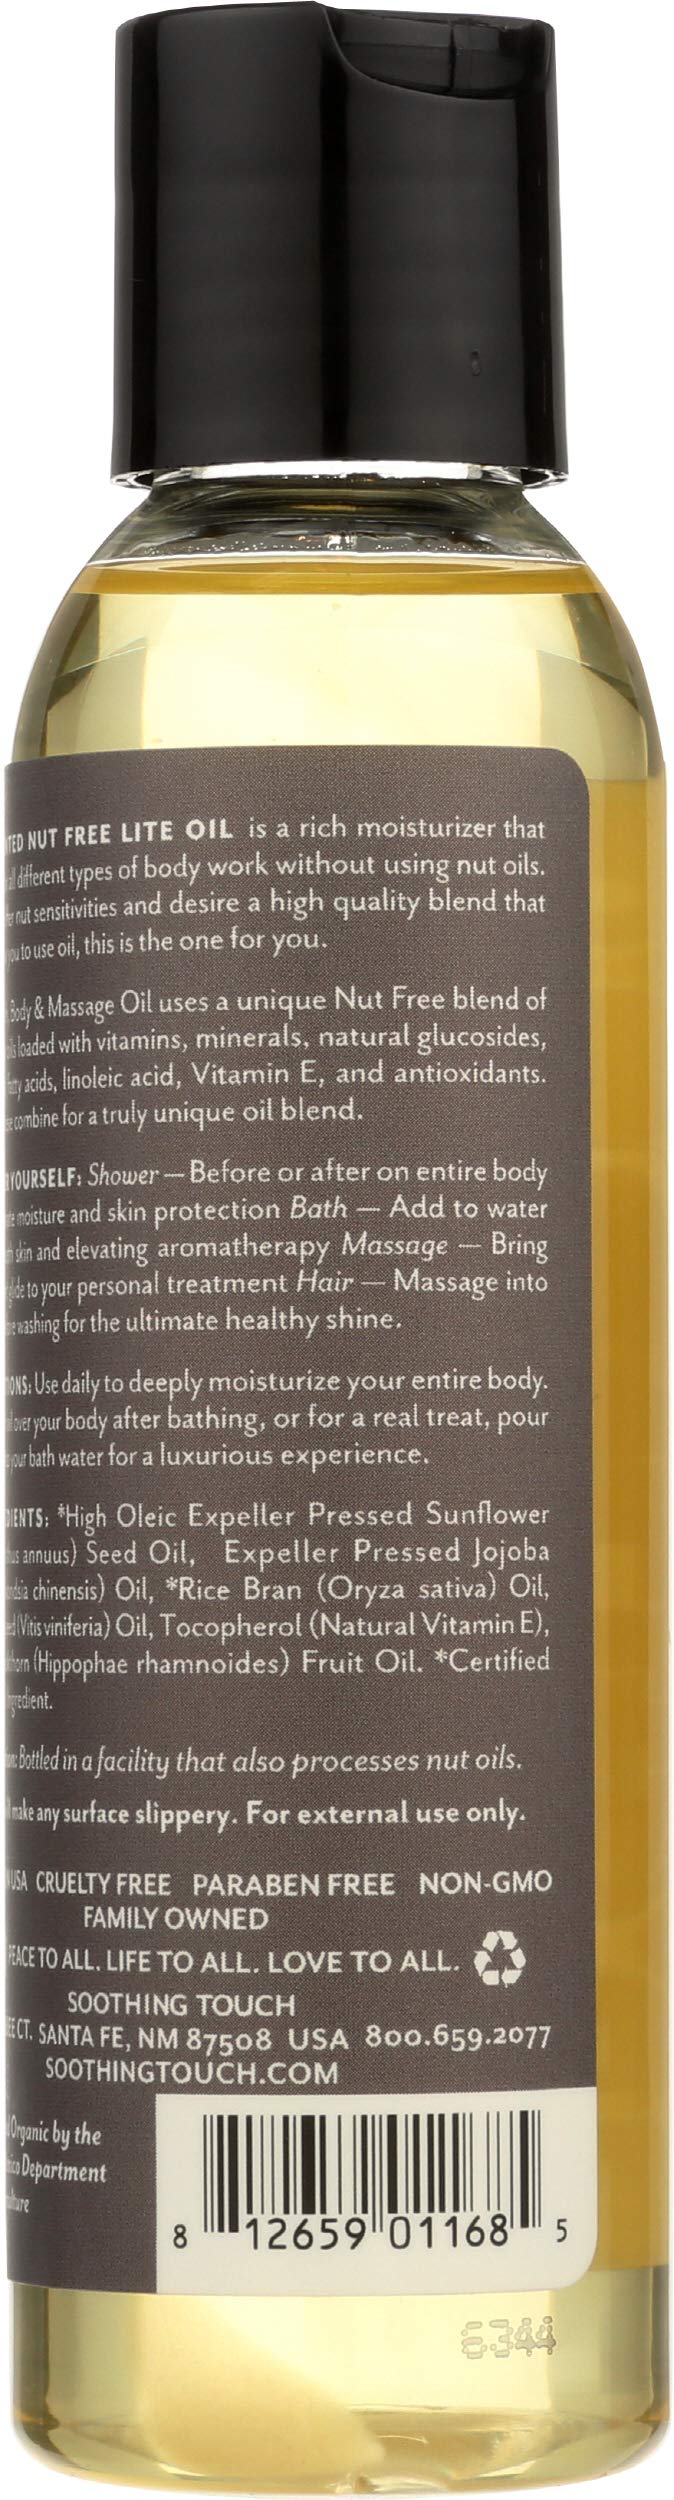 Soothing Touch Nut Free Lite Organic Bath Body & Massage Oil, Unscented, 4 Ounce